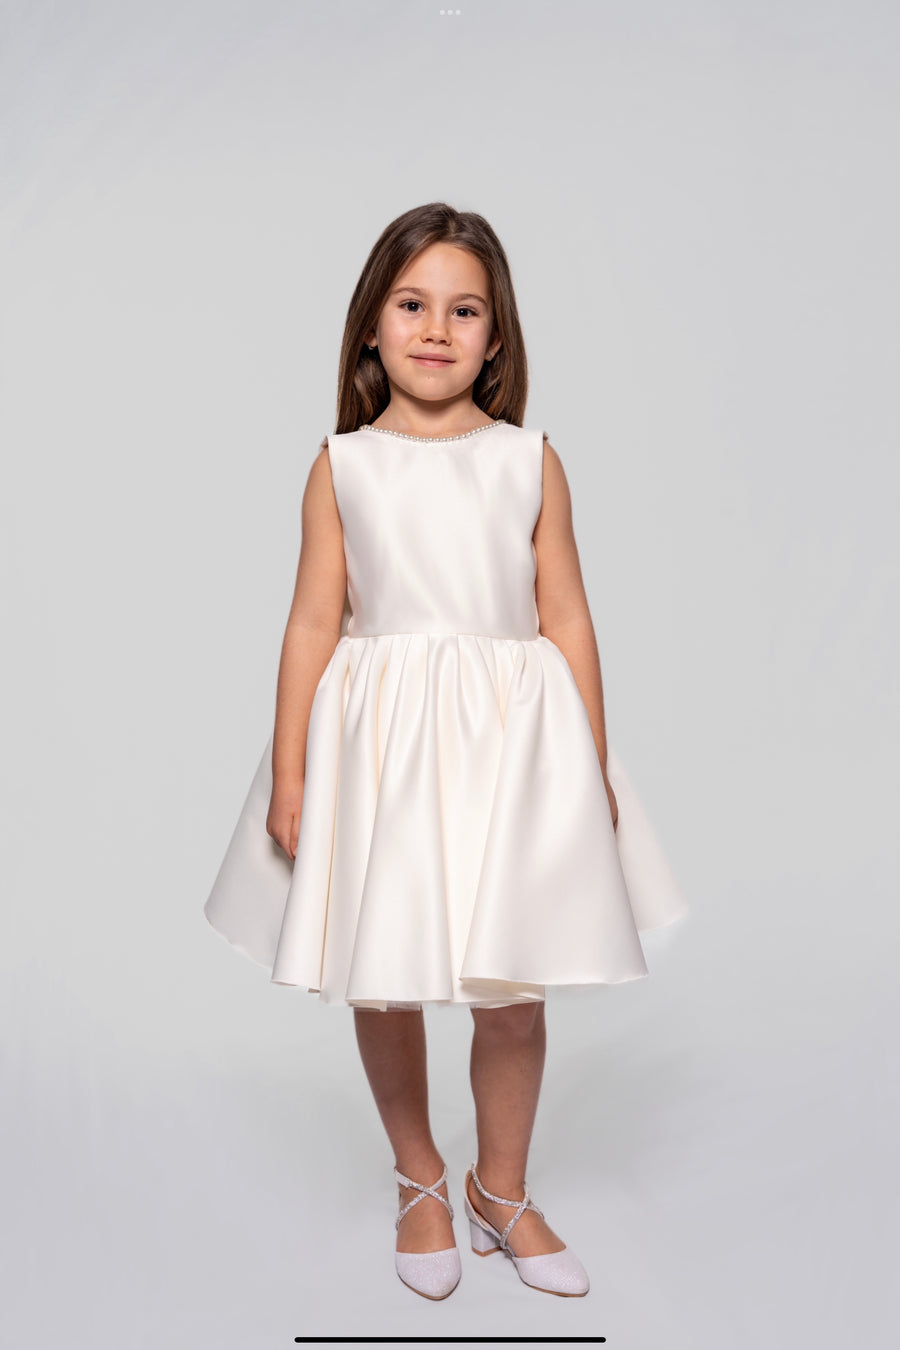 White satin dress embellished with pearls and a ribbon